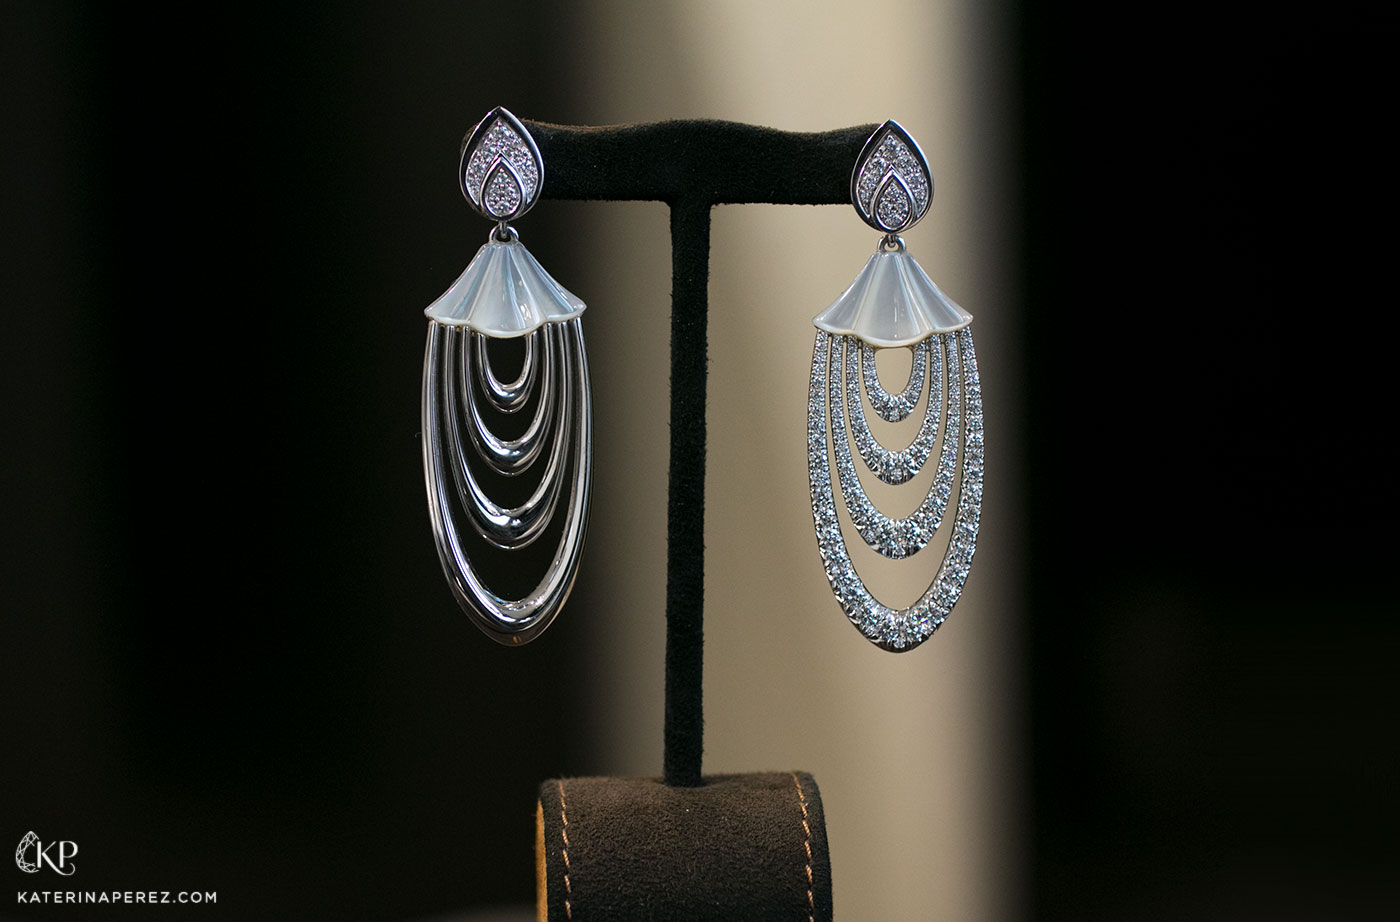 AVAKIAN Tosca earrings with the drops that can be worn with diamond or plain gold facing outwards